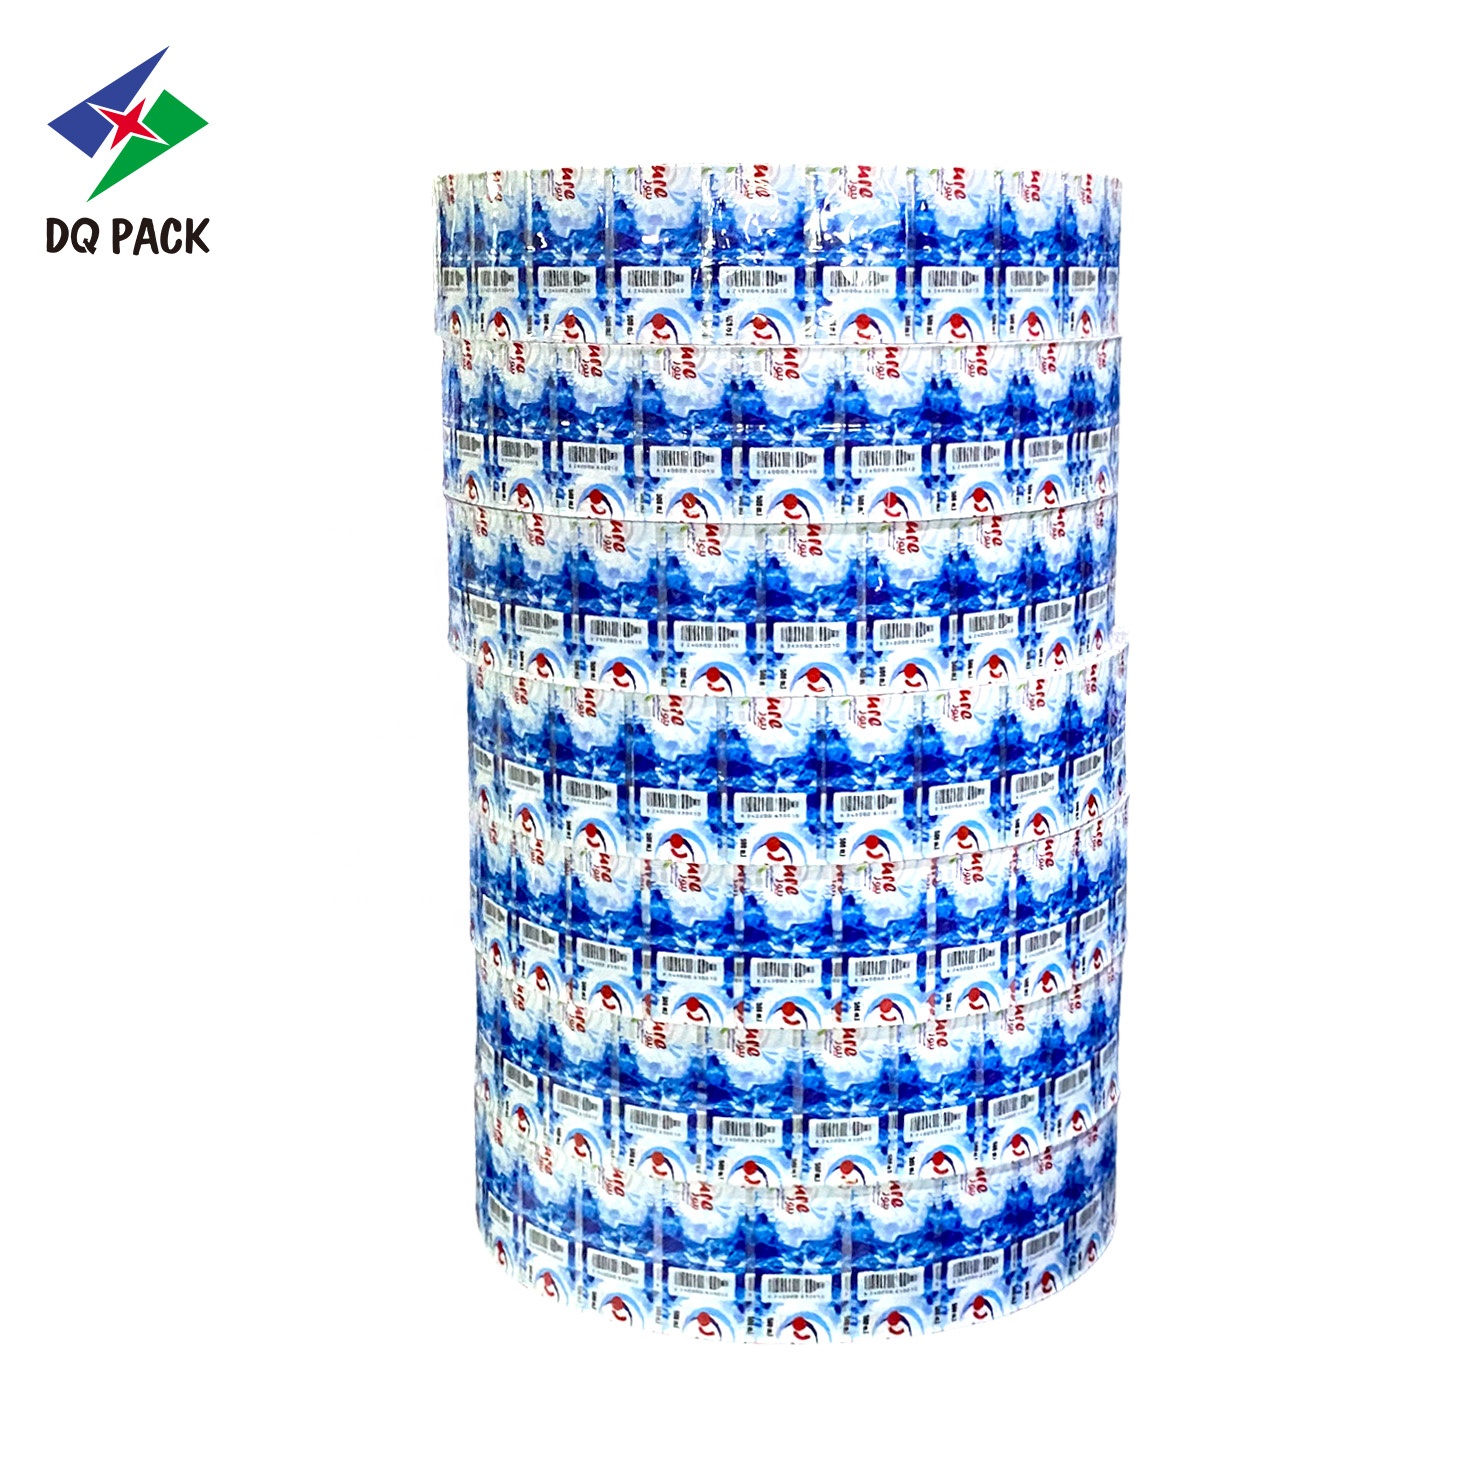 DQ PACK Mineral Water Label Shrink Sleeve PVC Shrink Film Wrap Bottle Labels For Water Bottles With Logo Printing